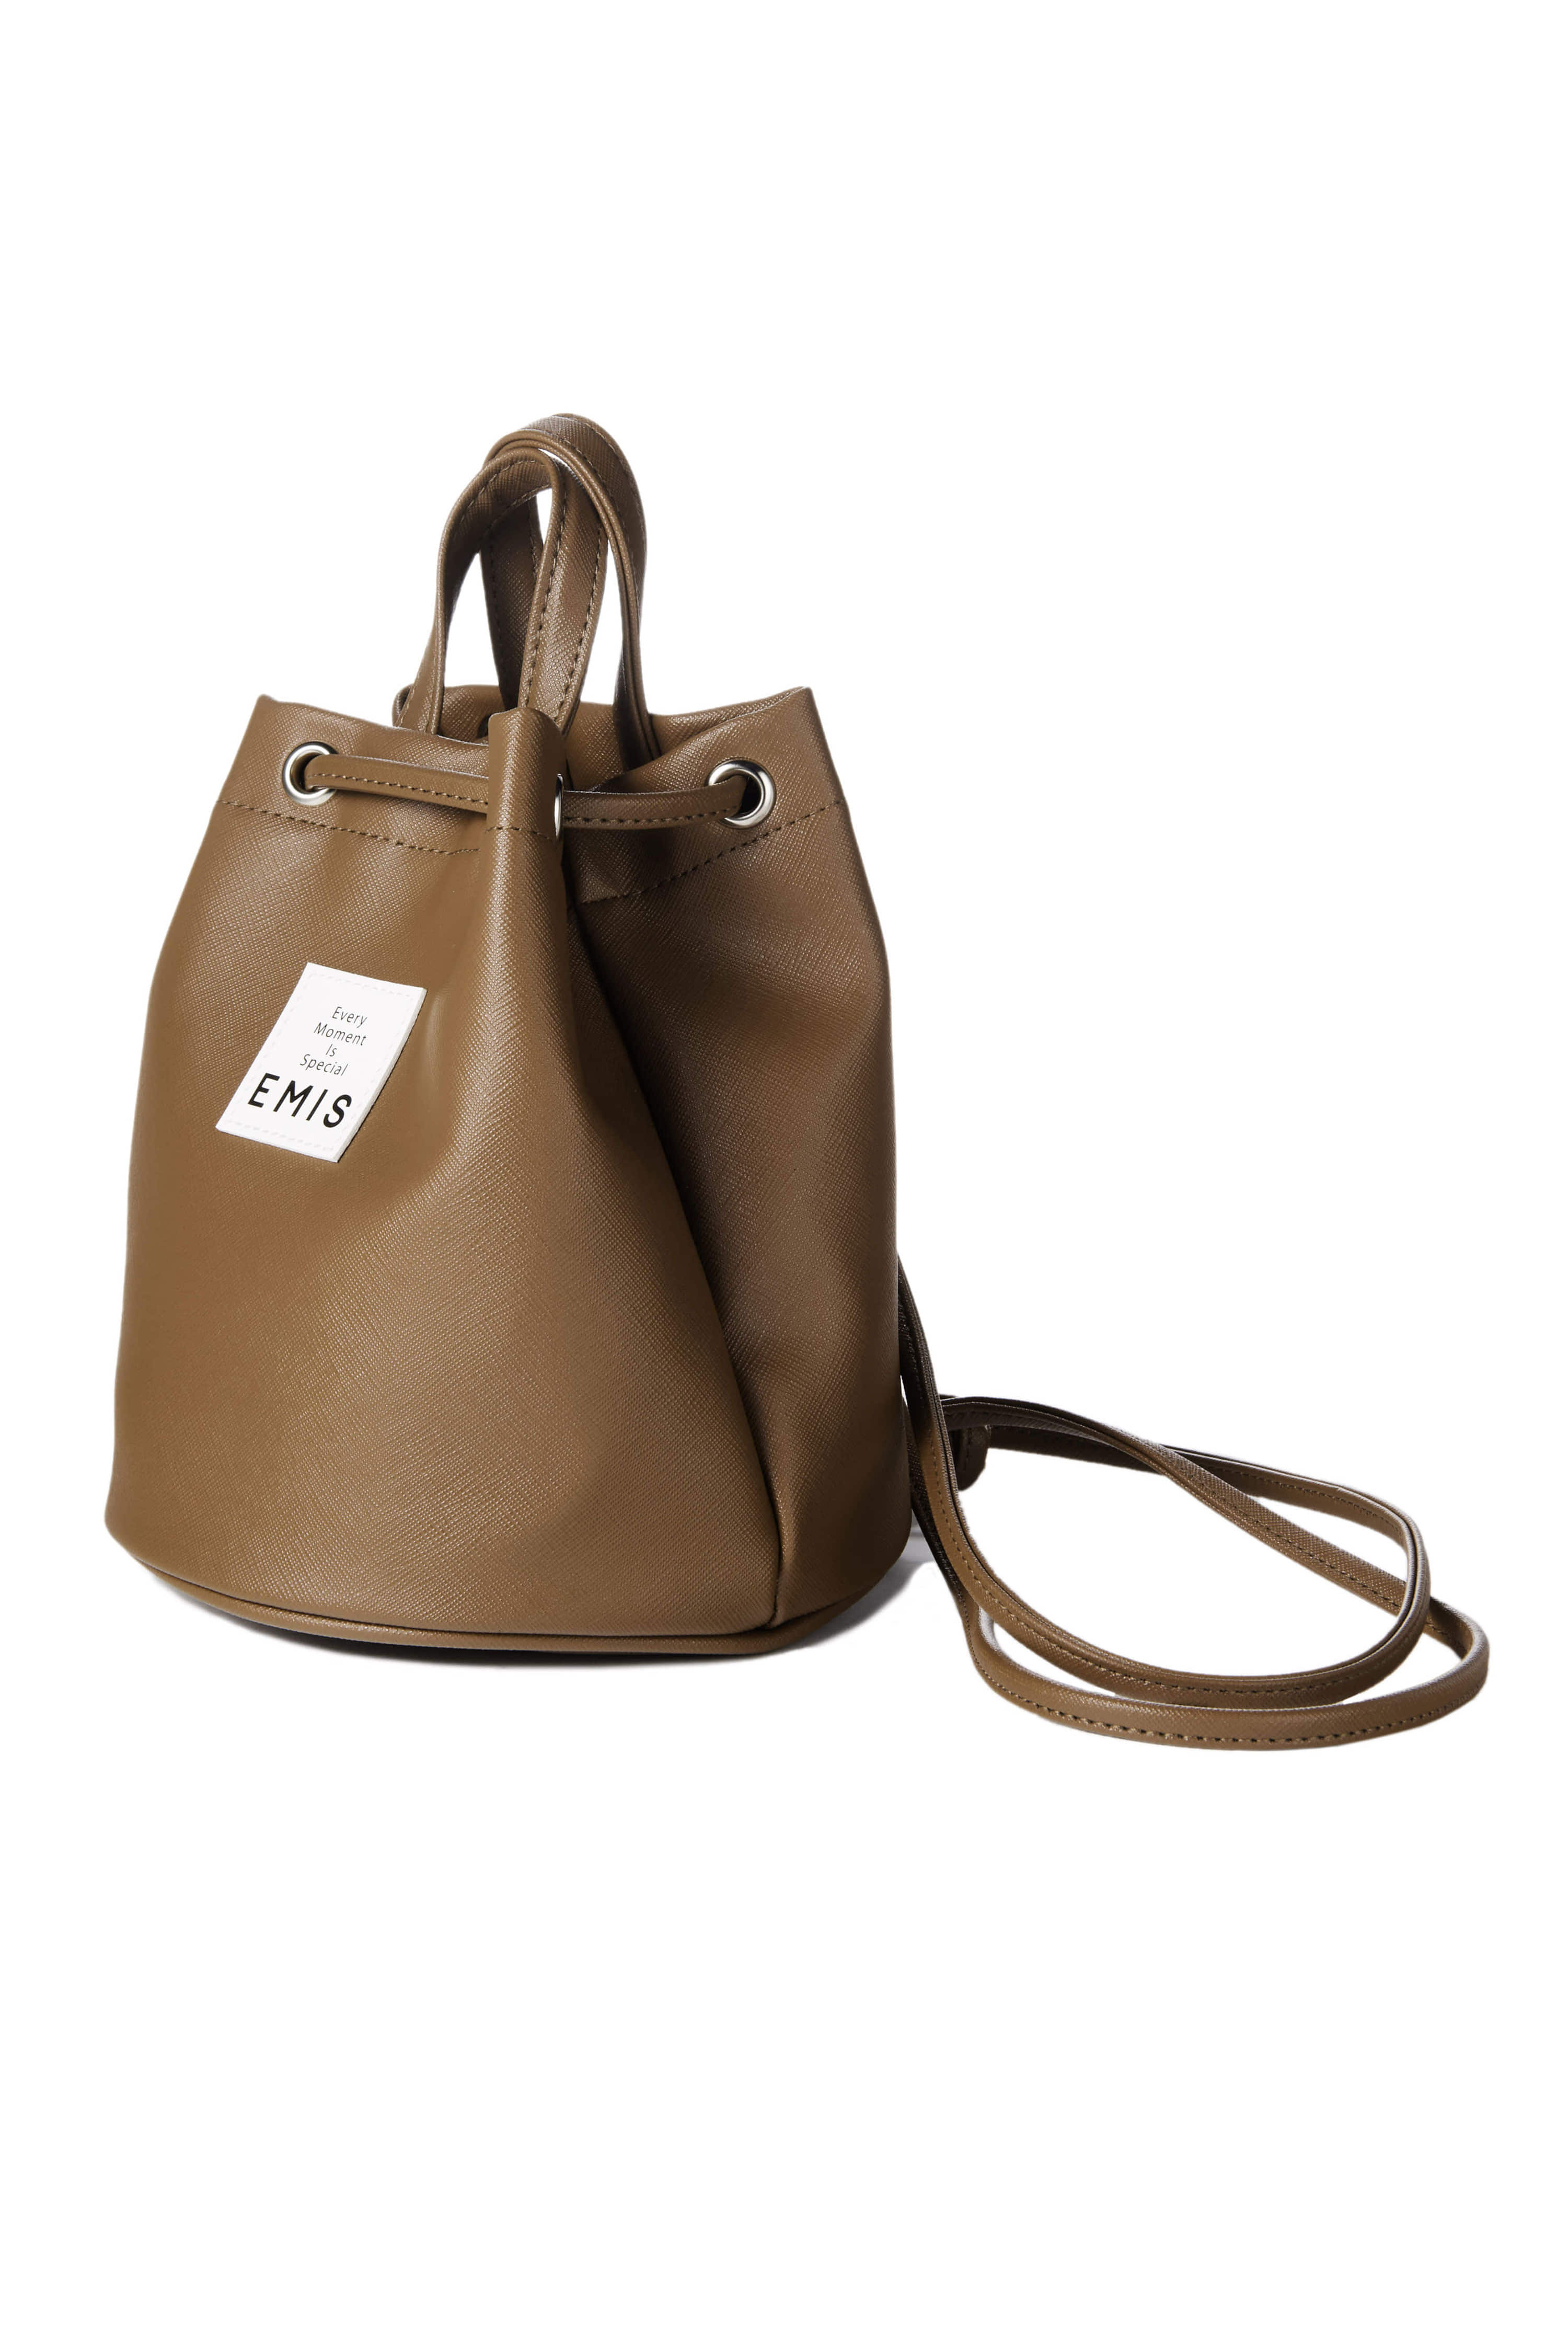 LEATHER MINI BACK PACK-BROWN